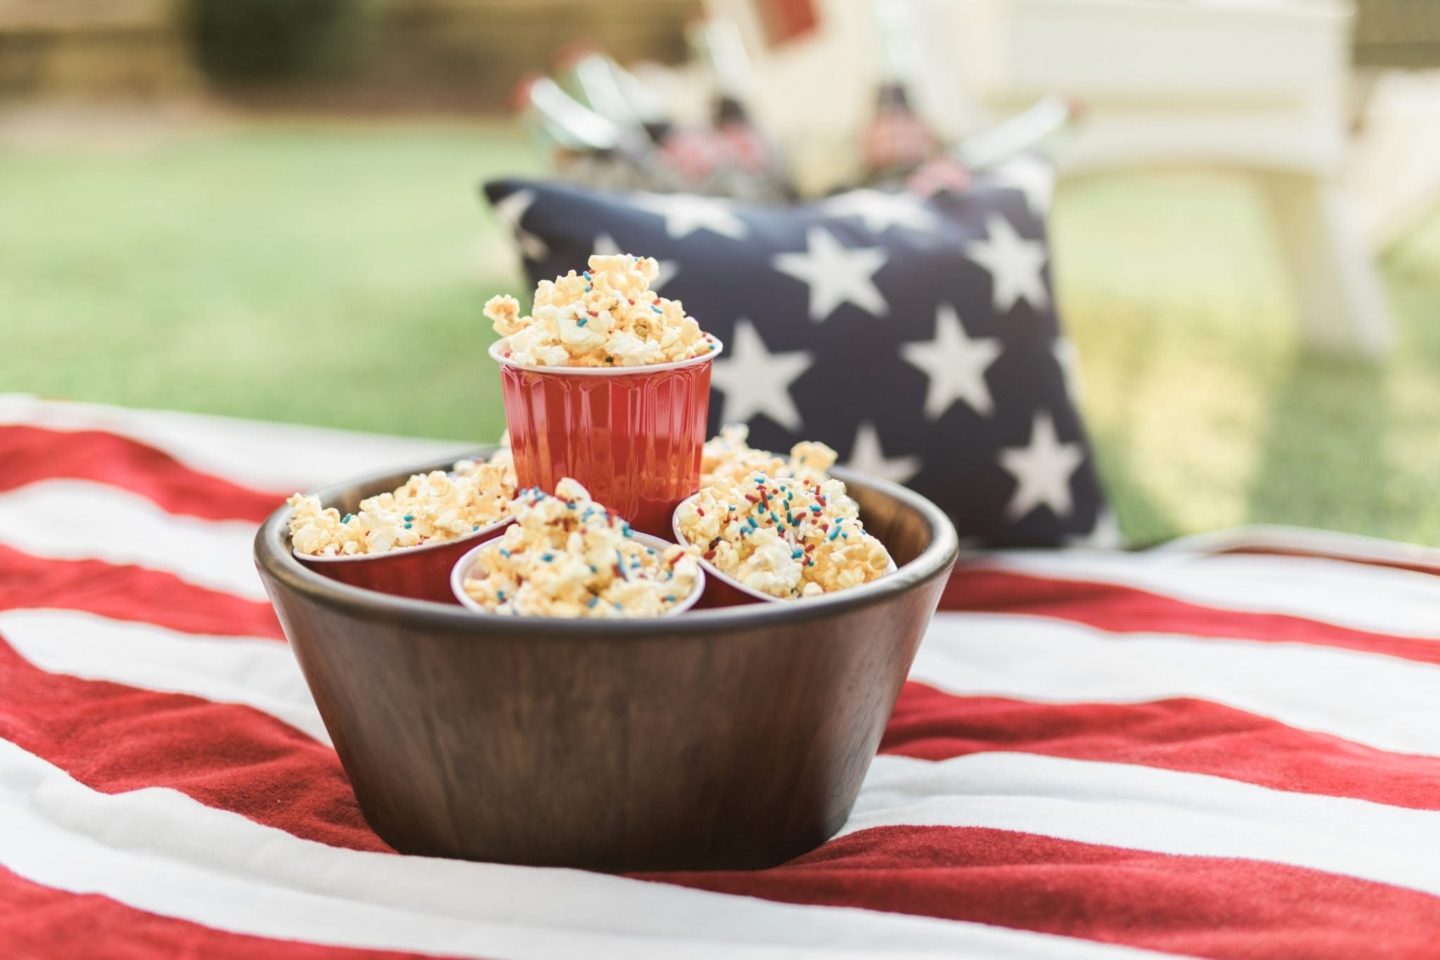 Fun 4th of july food ideas with popcorn with sprinkles for kids and easy fourth of july food ideas for everyone.